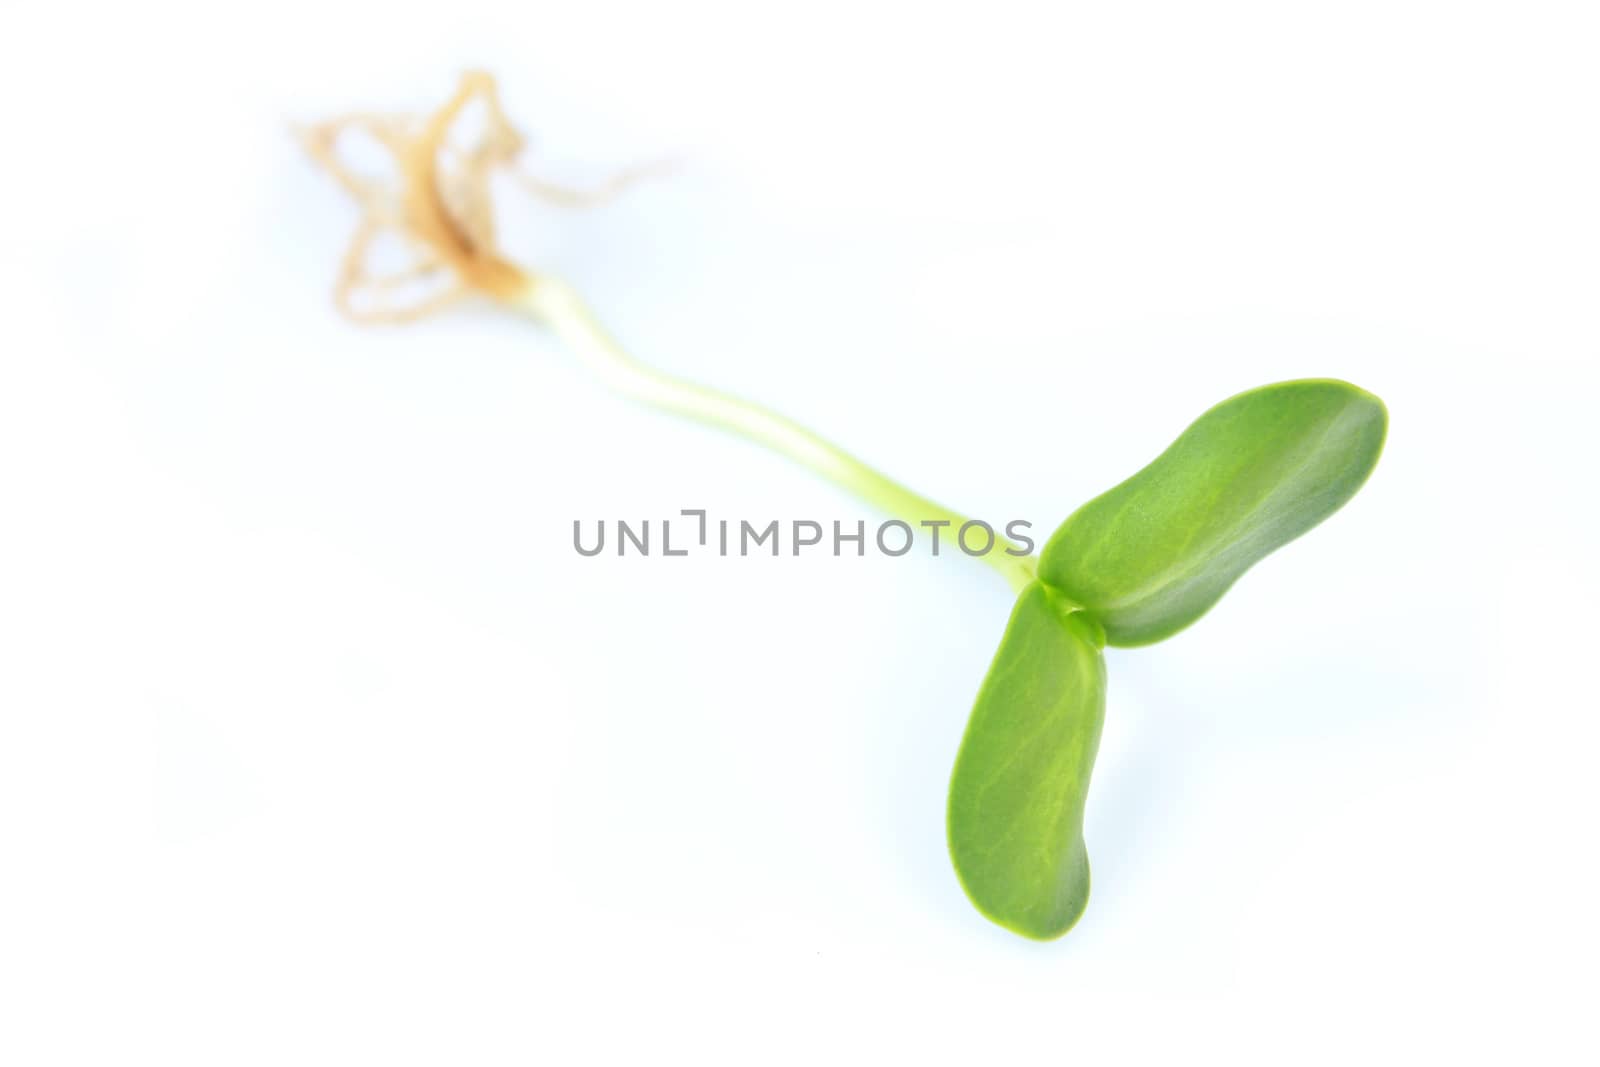 Organic green young sunflower sprouts by foto76